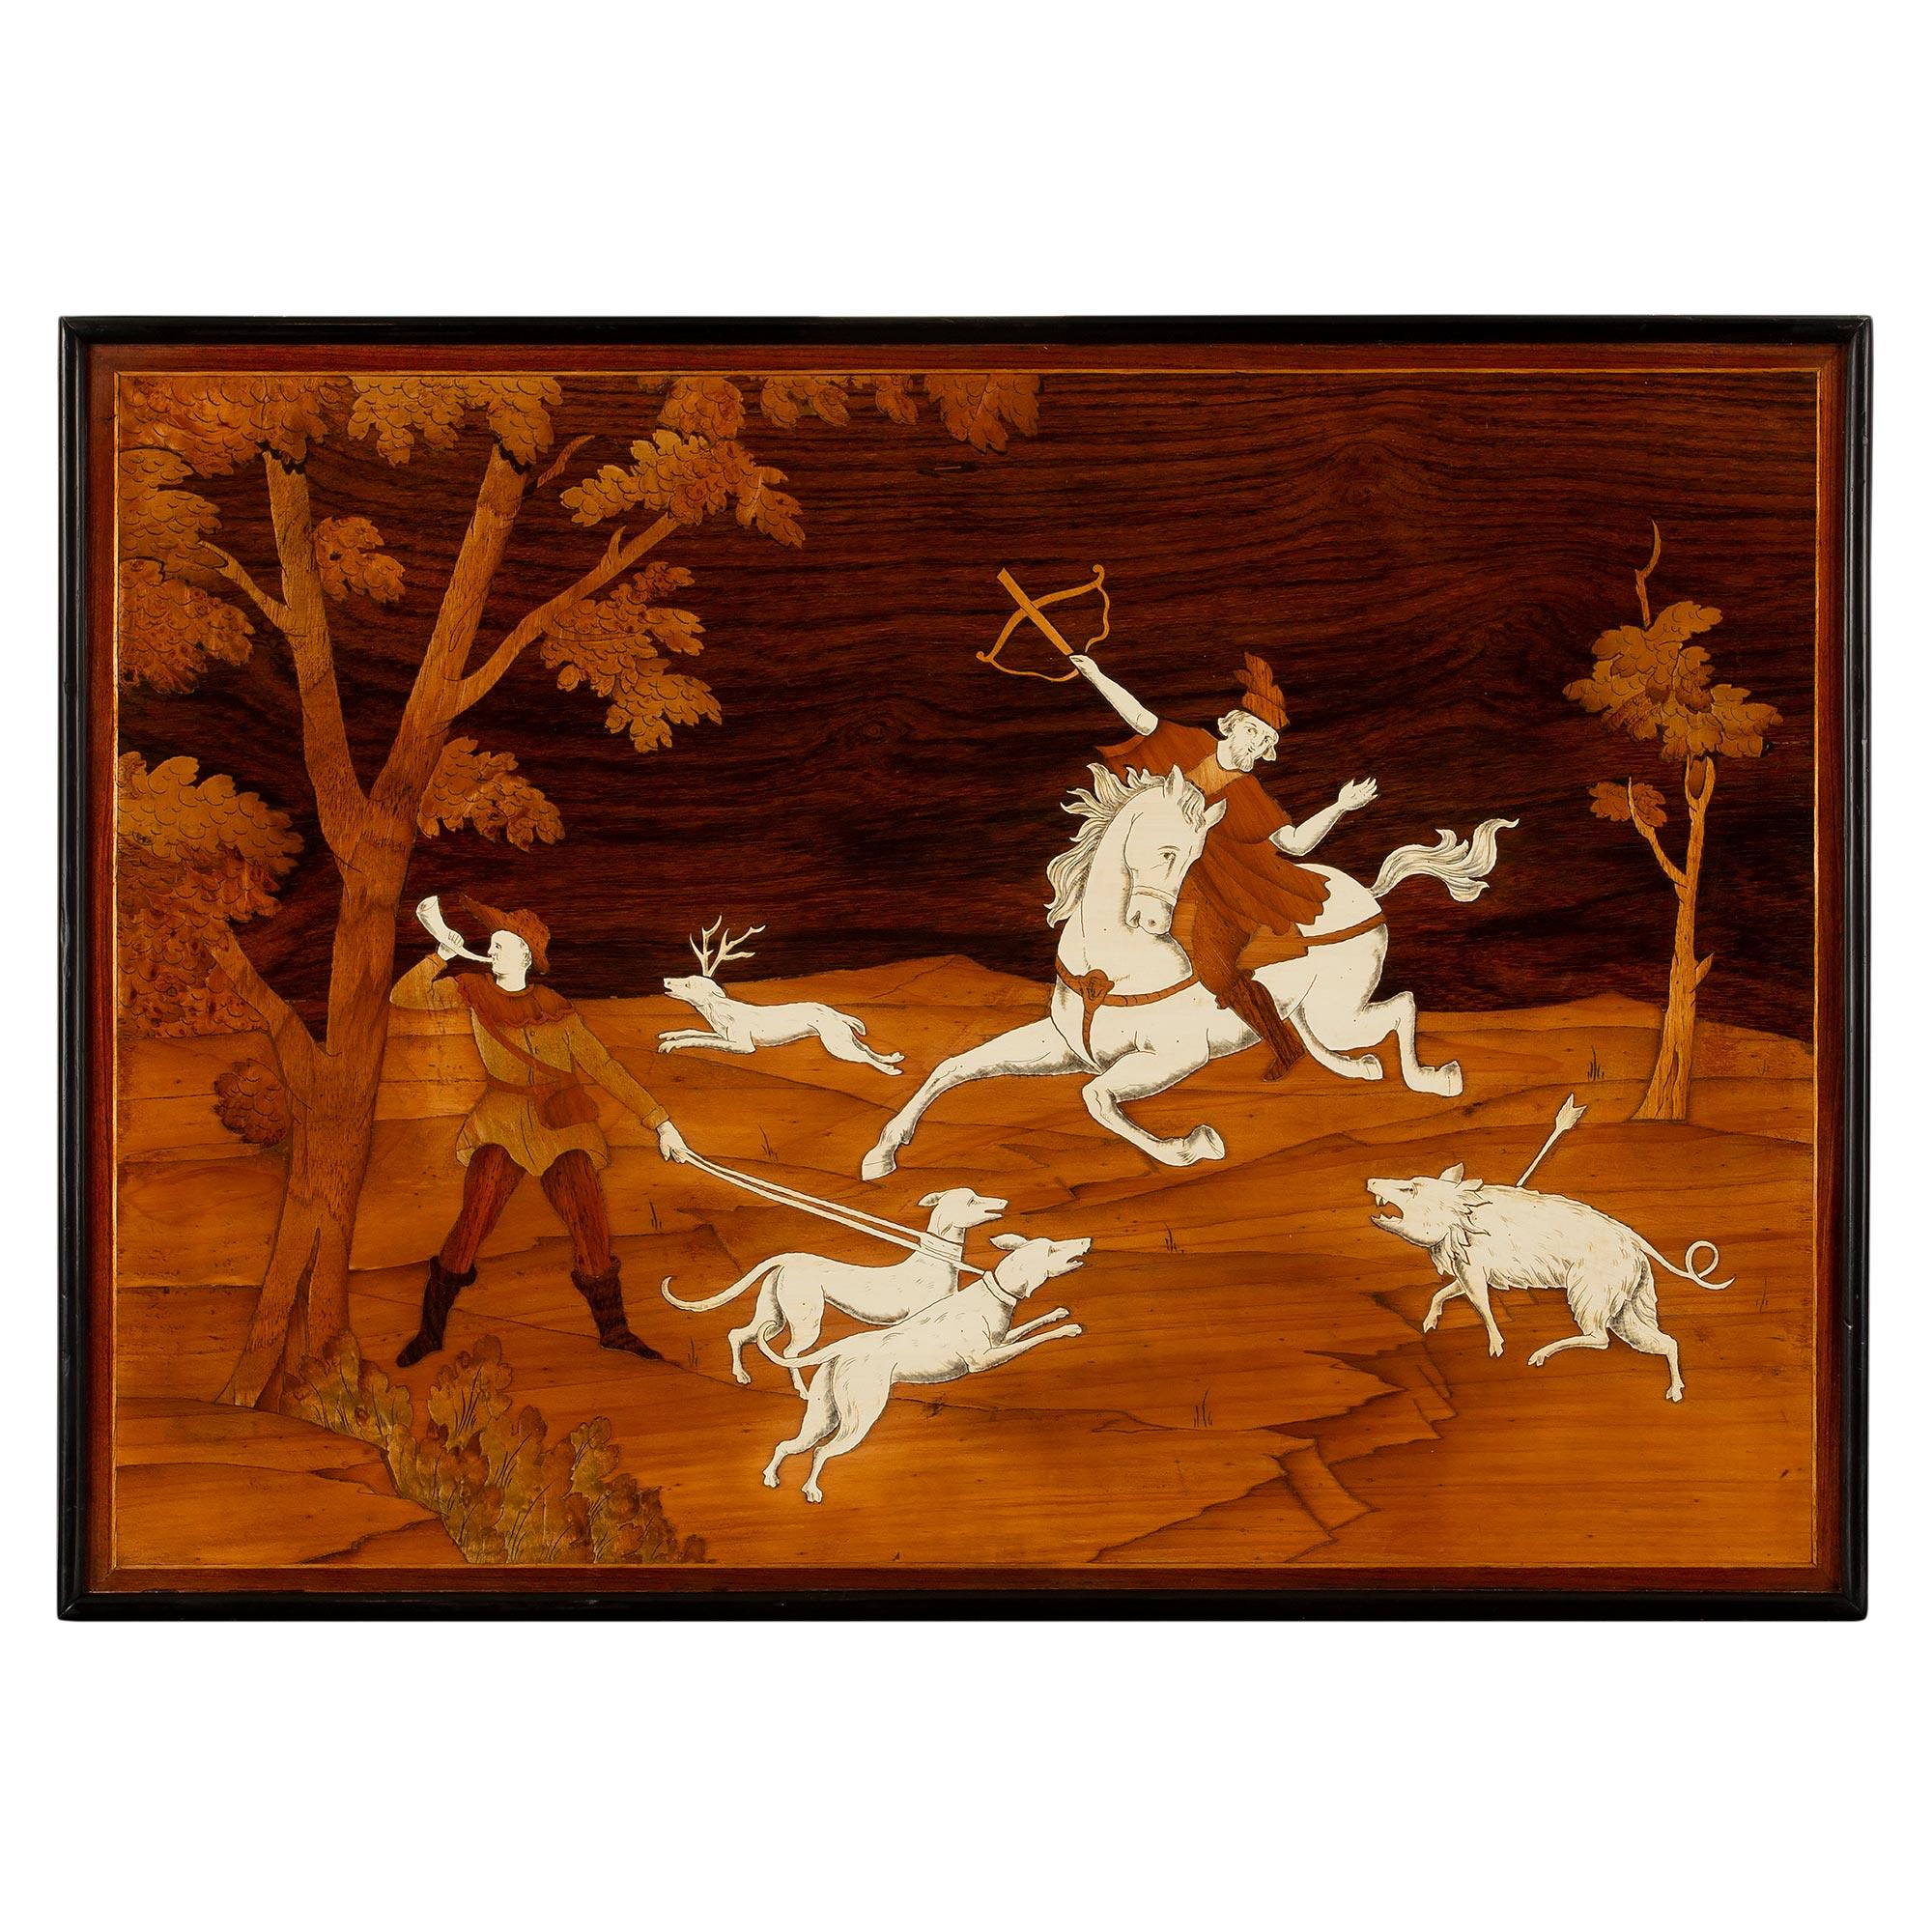 Italian 19th Century Decorative Marquetry Wall Panels In Good Condition For Sale In West Palm Beach, FL